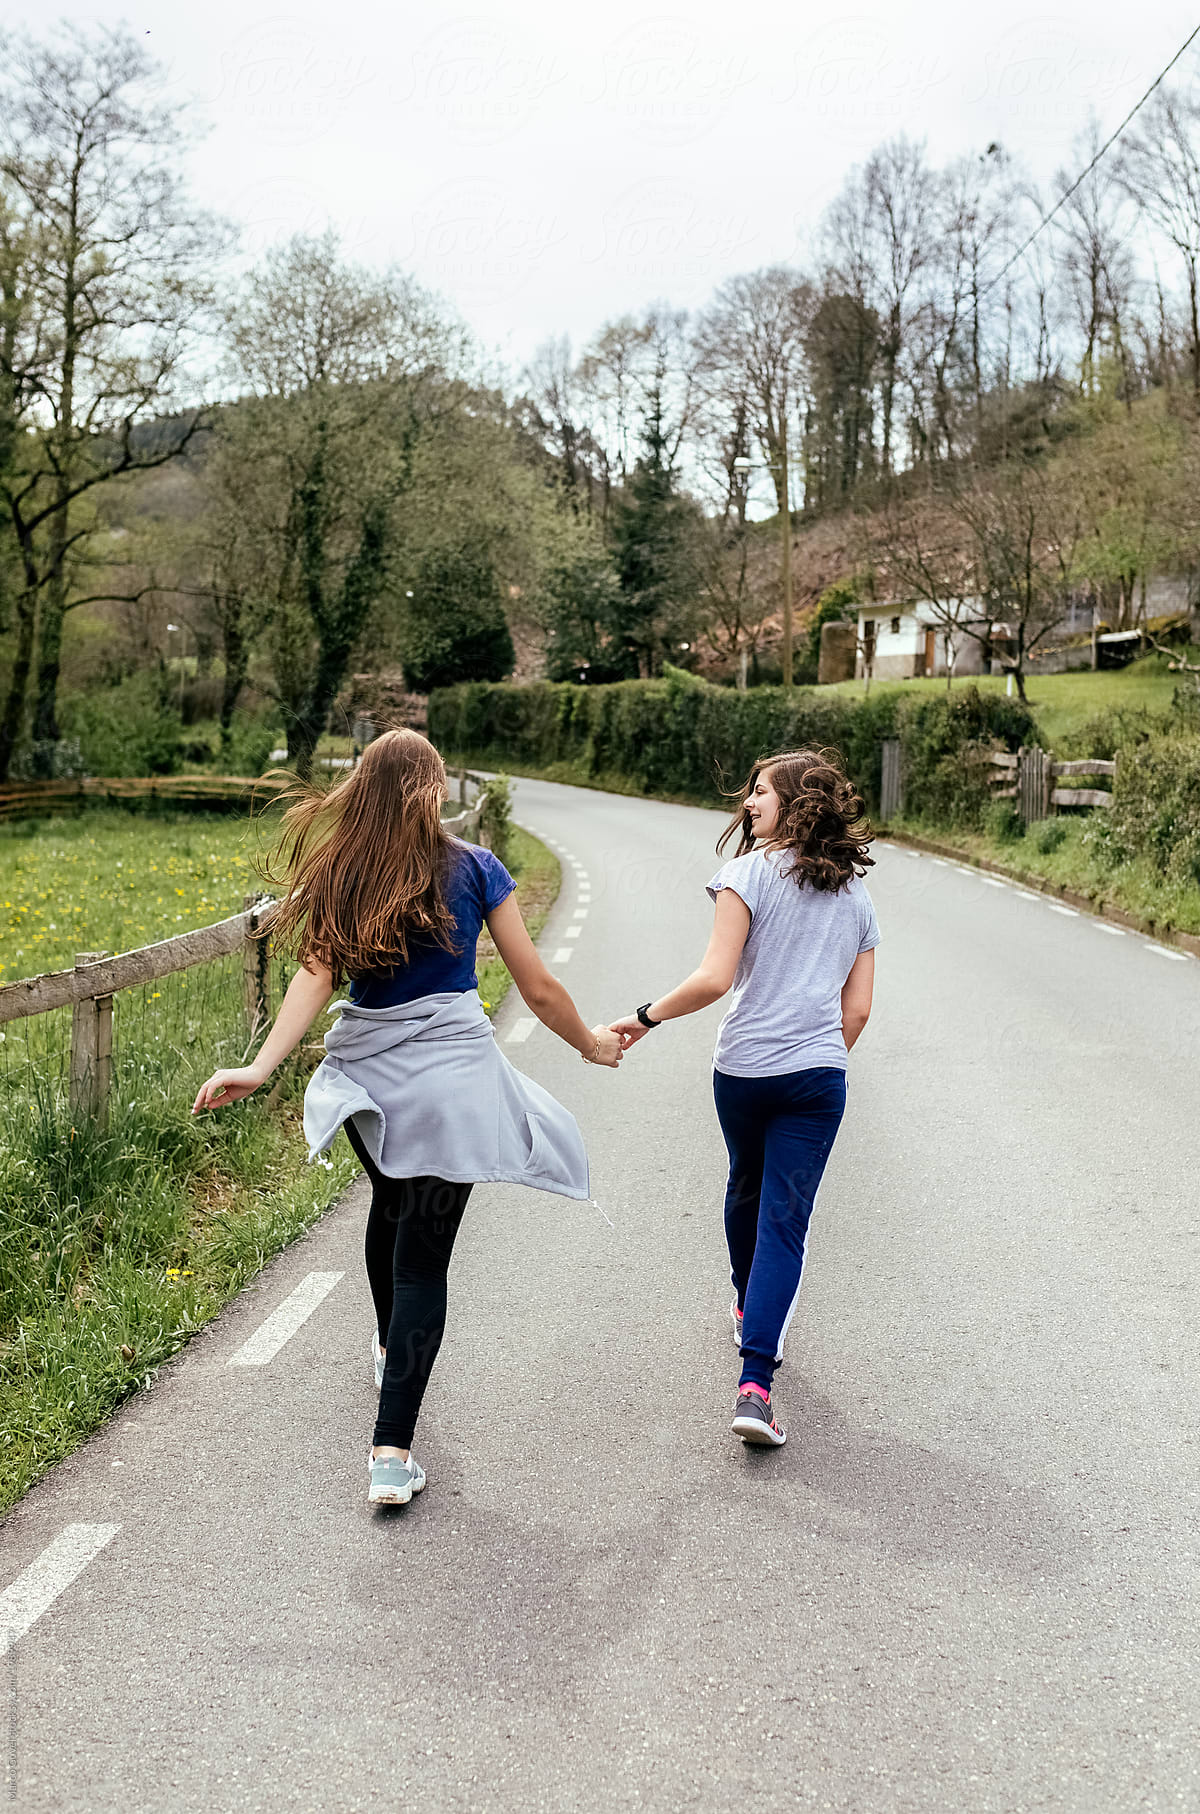 Two Teenage Girls Hiking On A Road By Stocksy Contributor Marco Govel Stocksy 